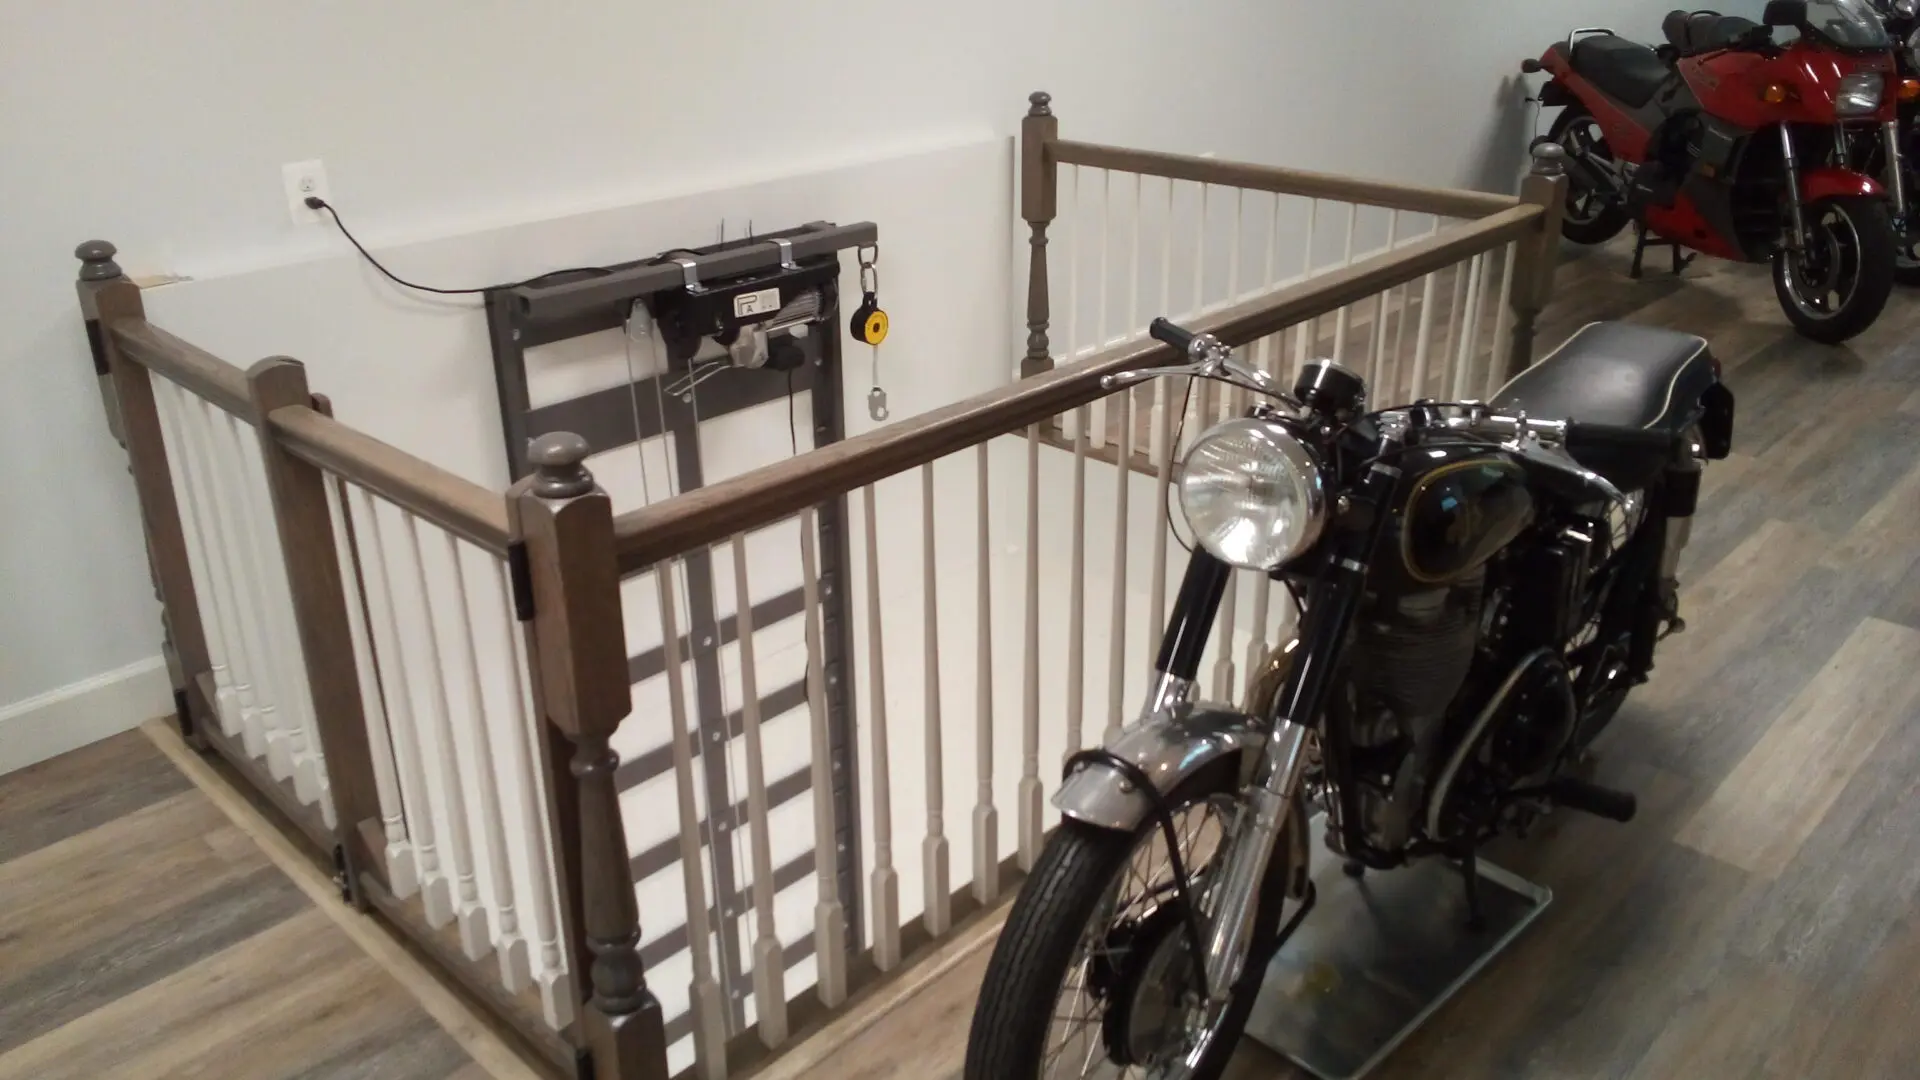 Motorcycles on the garage’s second story and the lift on one side